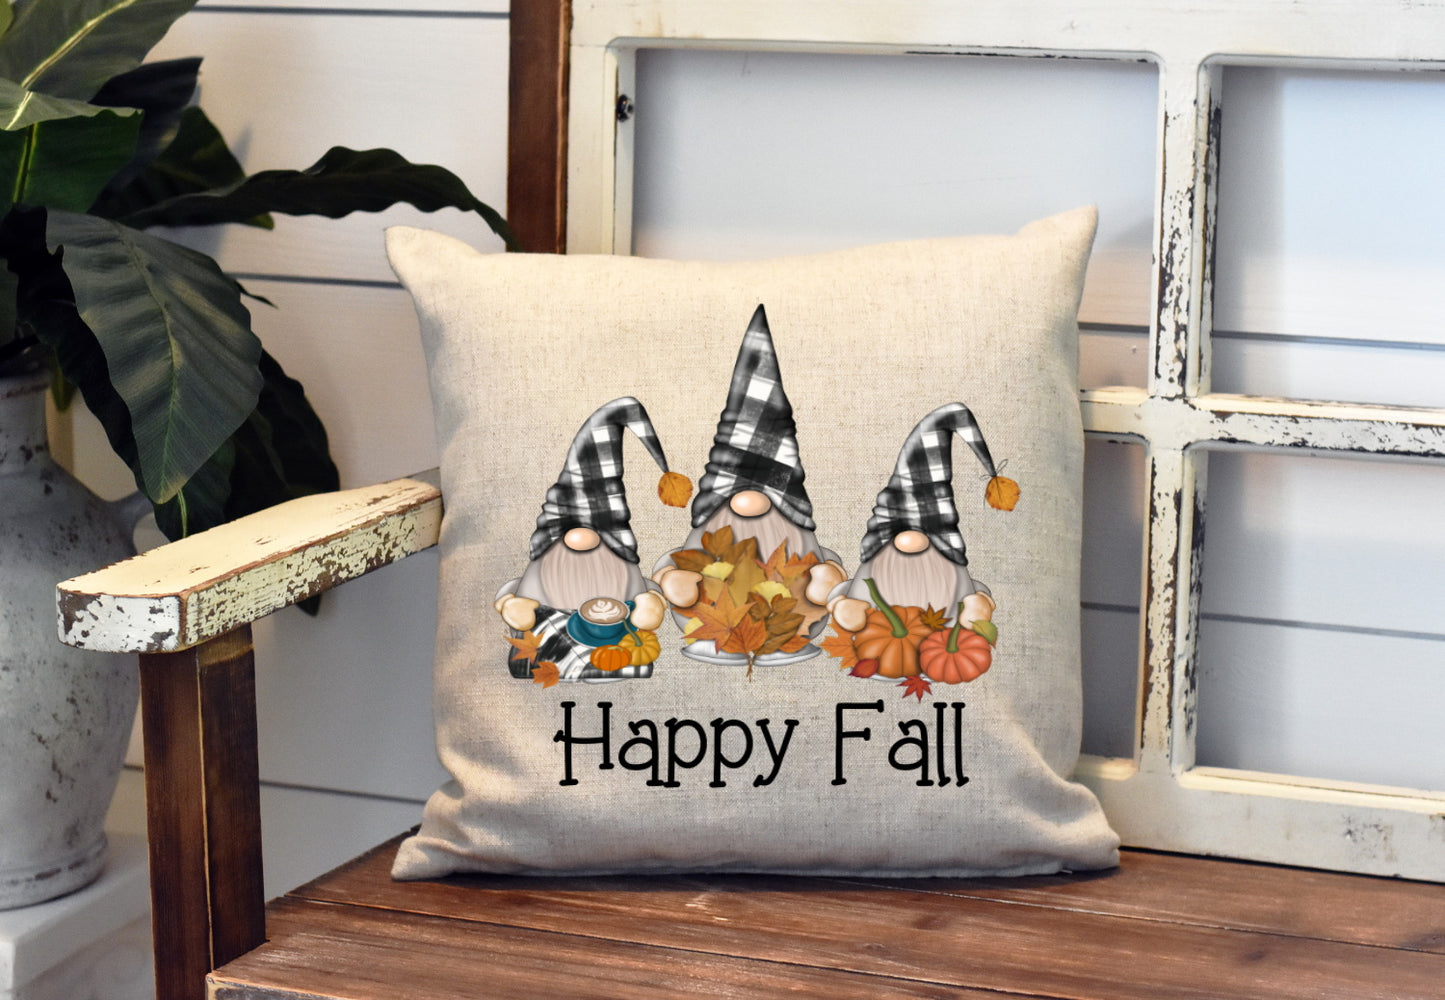 Happy Fall Gnome Pillow Cover - Cute Plaid Gnomes - Thanksgiving Fall Farm Decorations house Decor Throw Pillow Cover